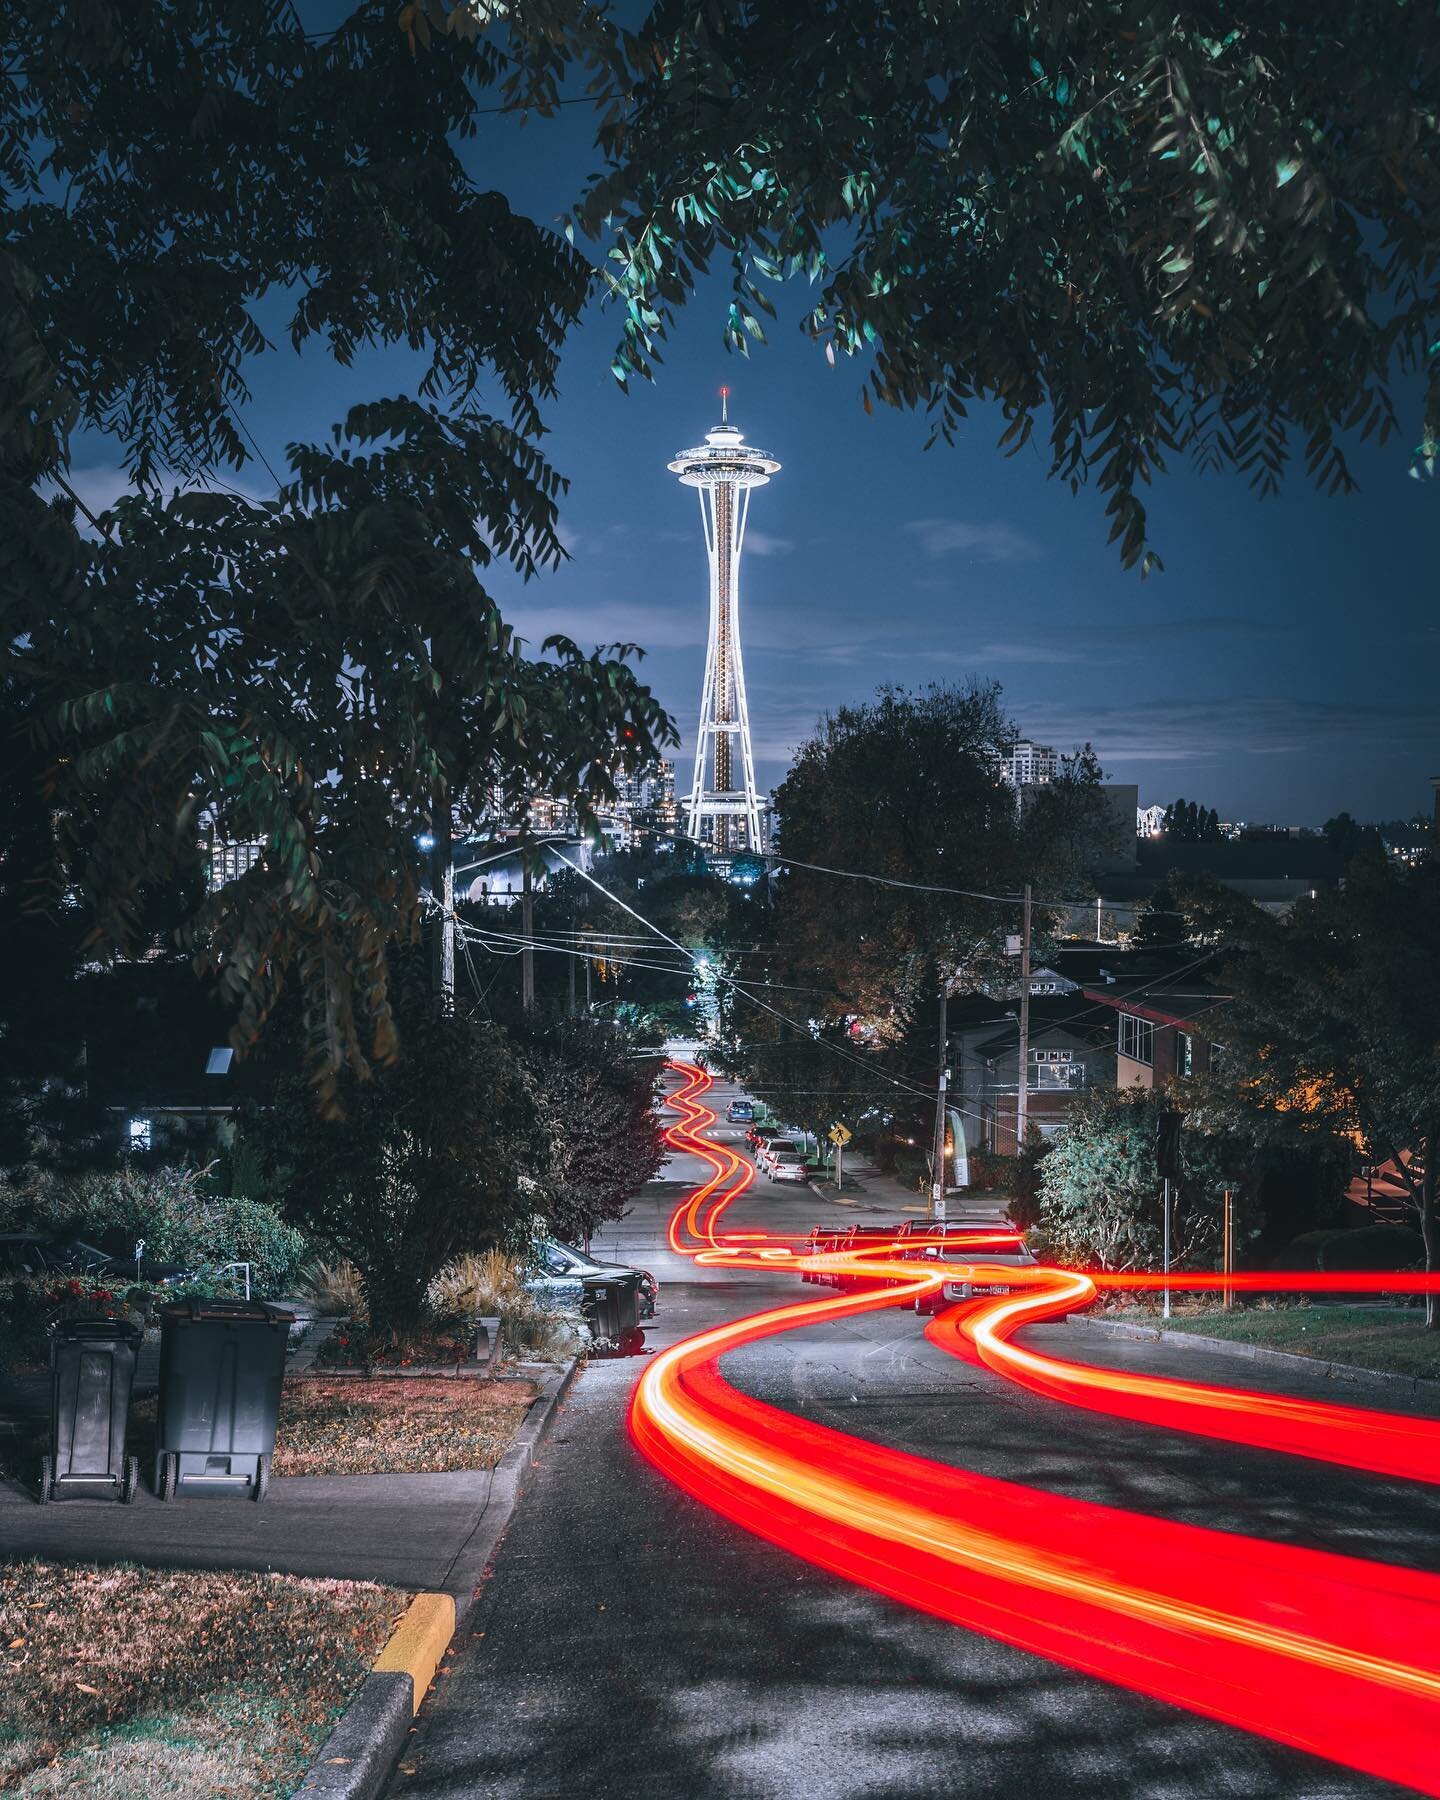 Warp speed into a long weekend! 

Shoutout to @fel_photography_ for helping me create this shot. 
.
.
.
.
#curiocityseattle #seattle #tmobilepark #citykillerz #urbanandstreet #night_owlz #streetframez #toneception #shotz_fired #nightshooters #electic